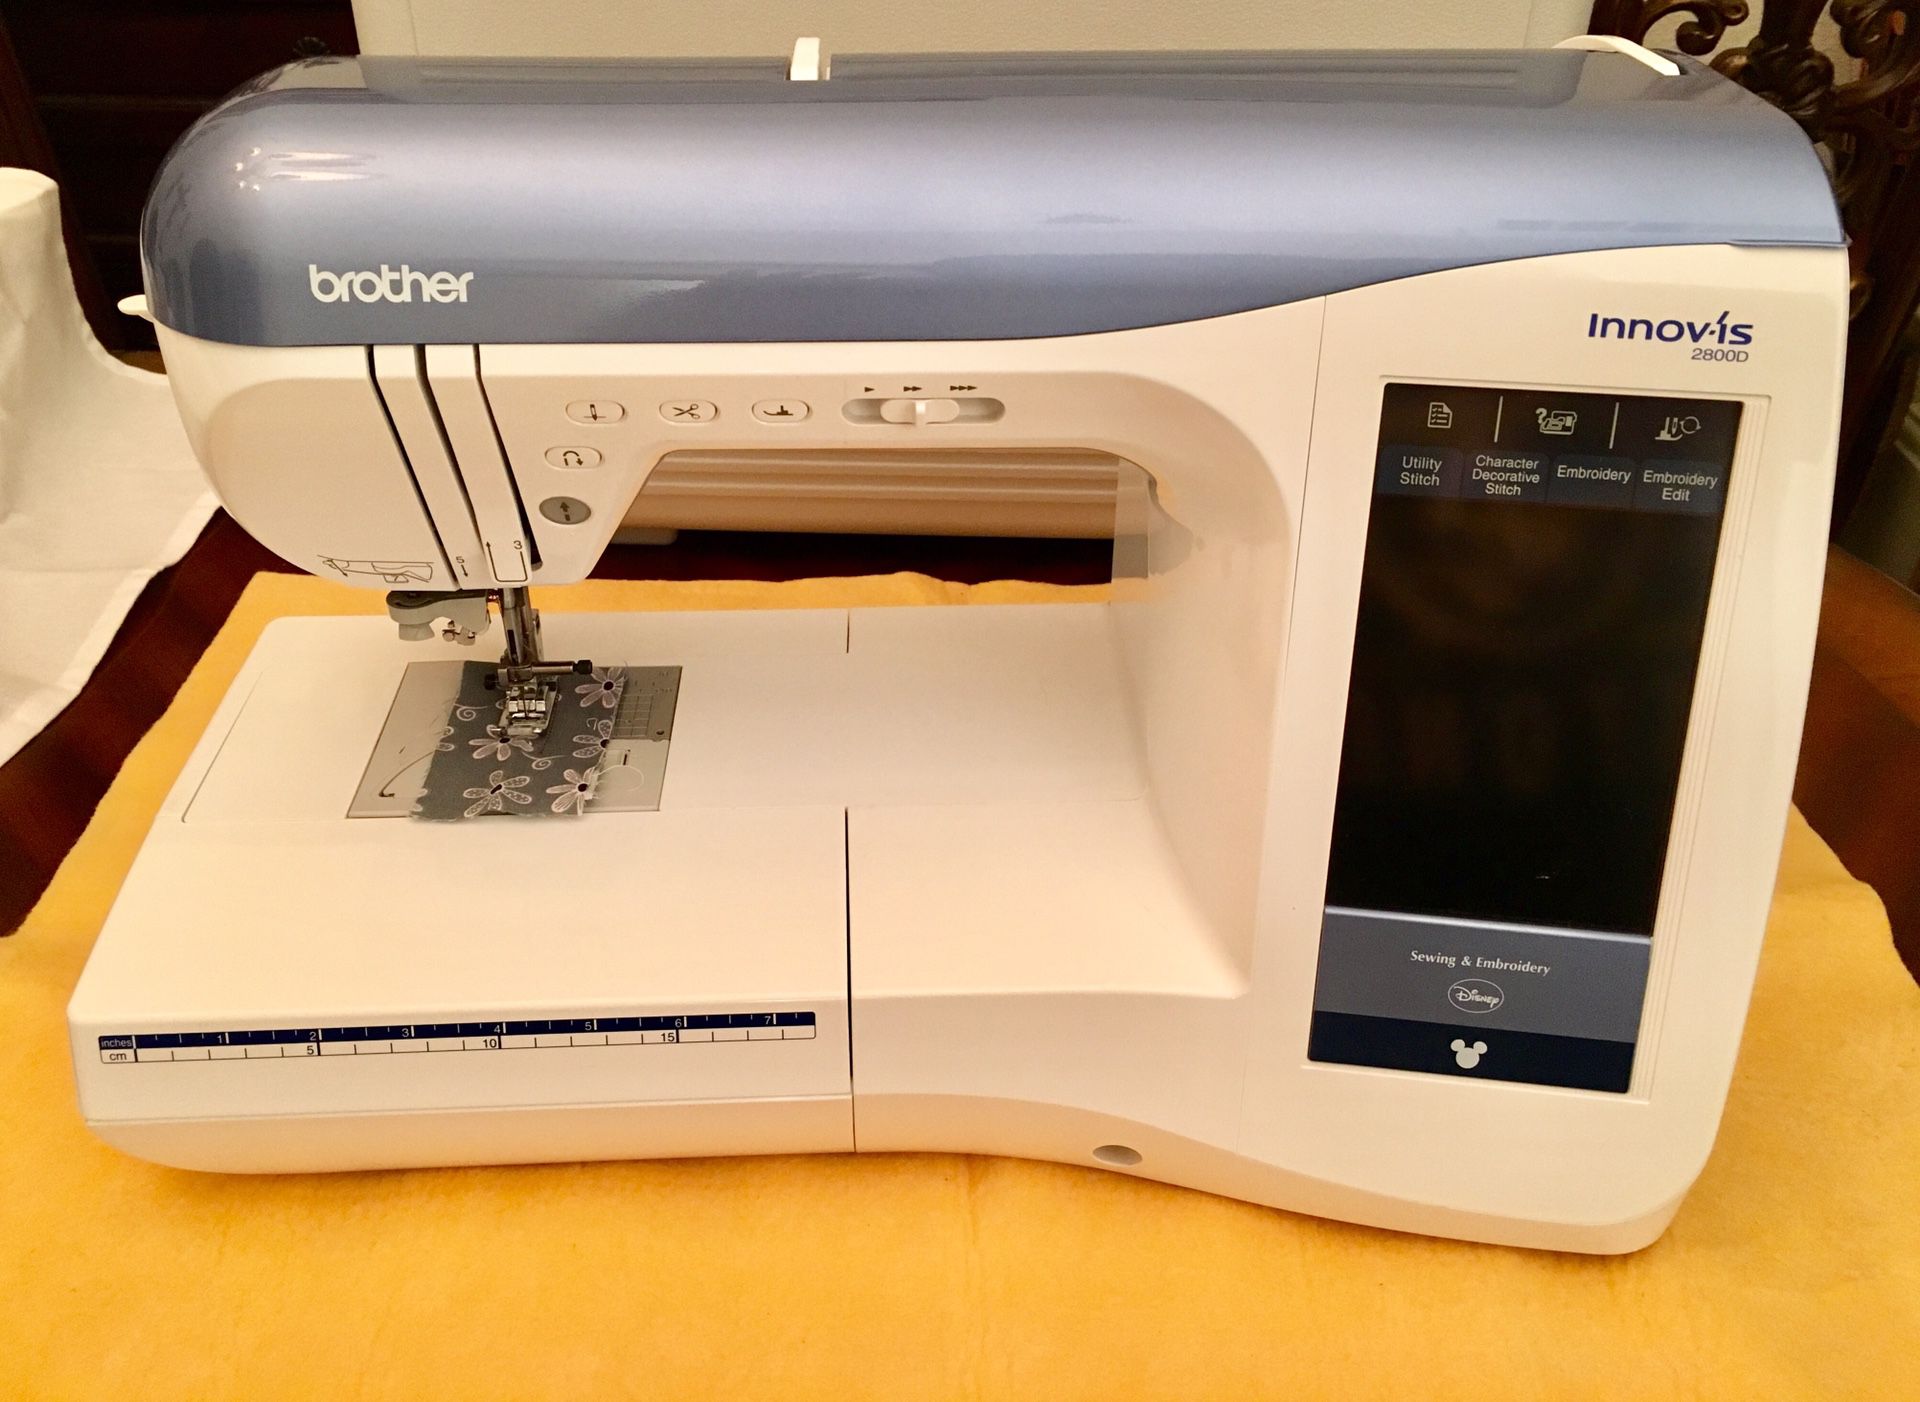 Brother Innov-ís 2800D Sewing/Embroidery Machine